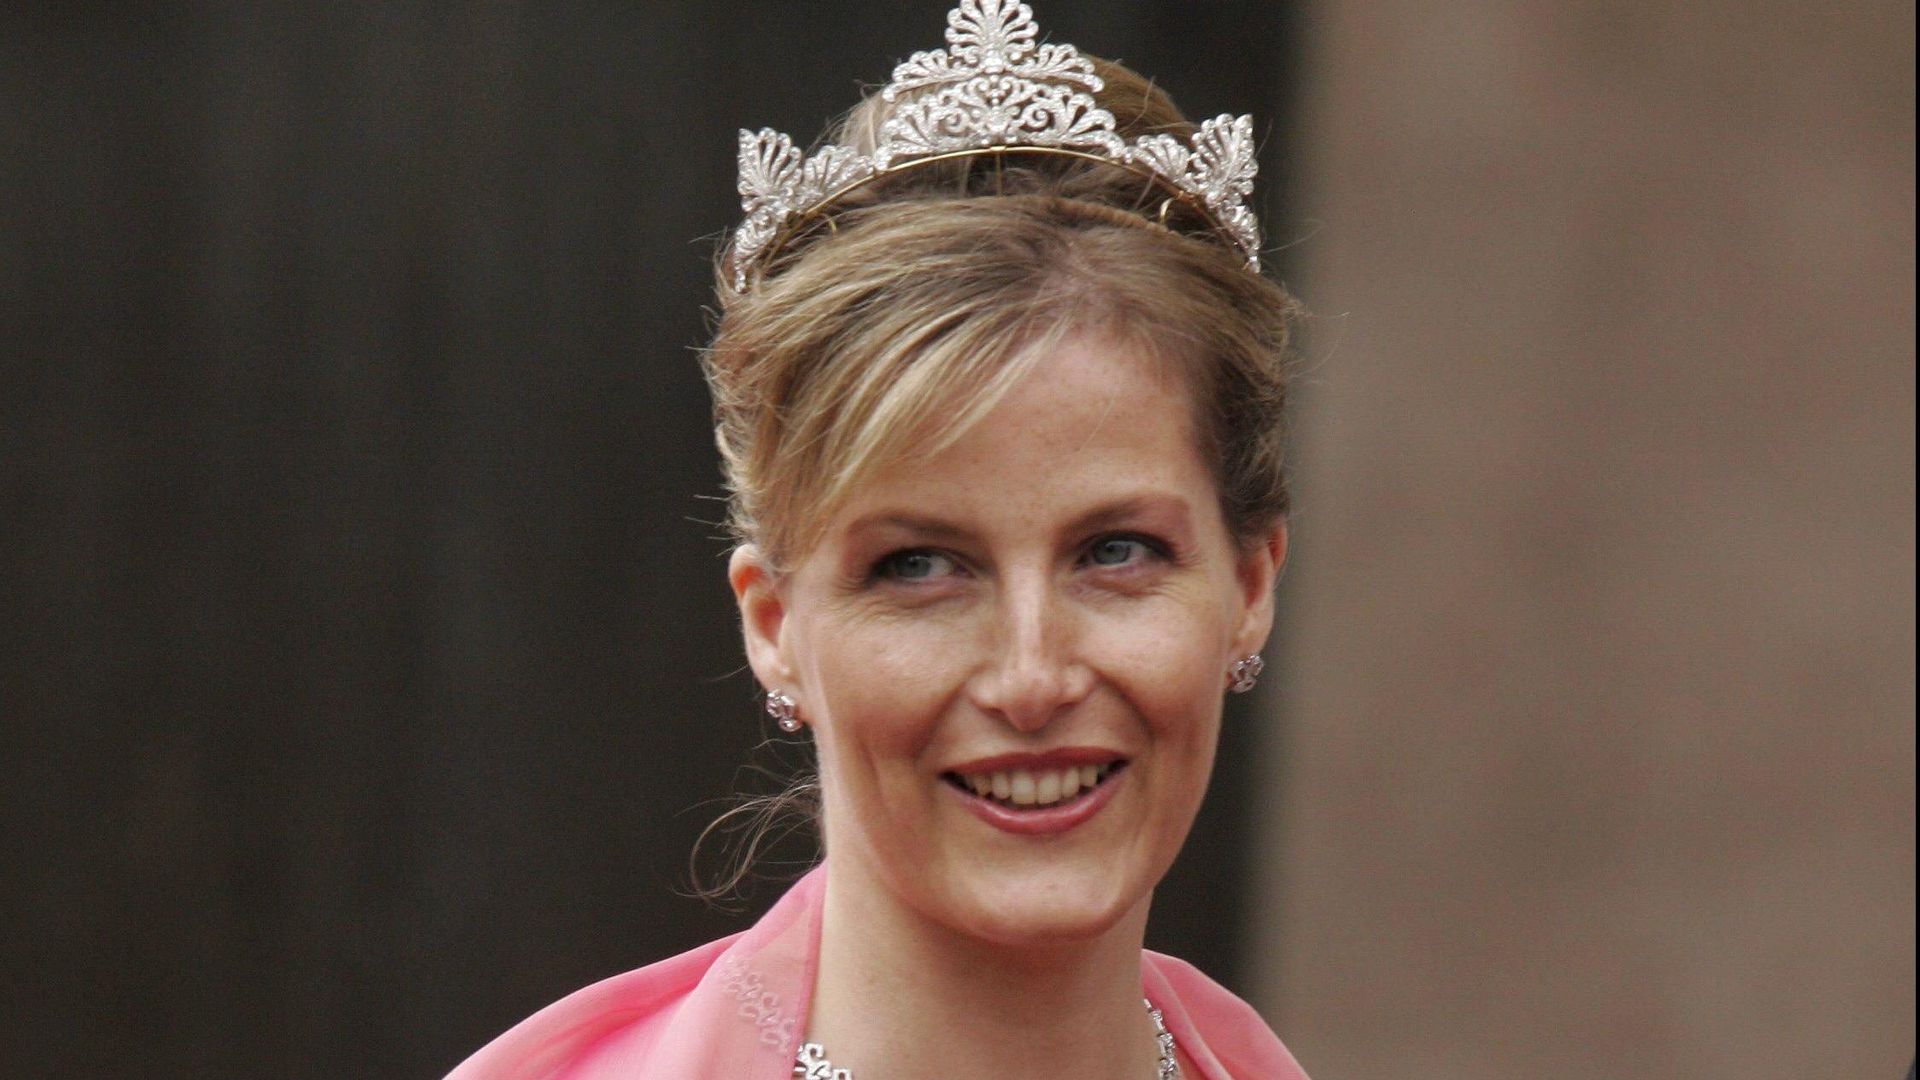 Duchess Sophie in a pink dress and tiara